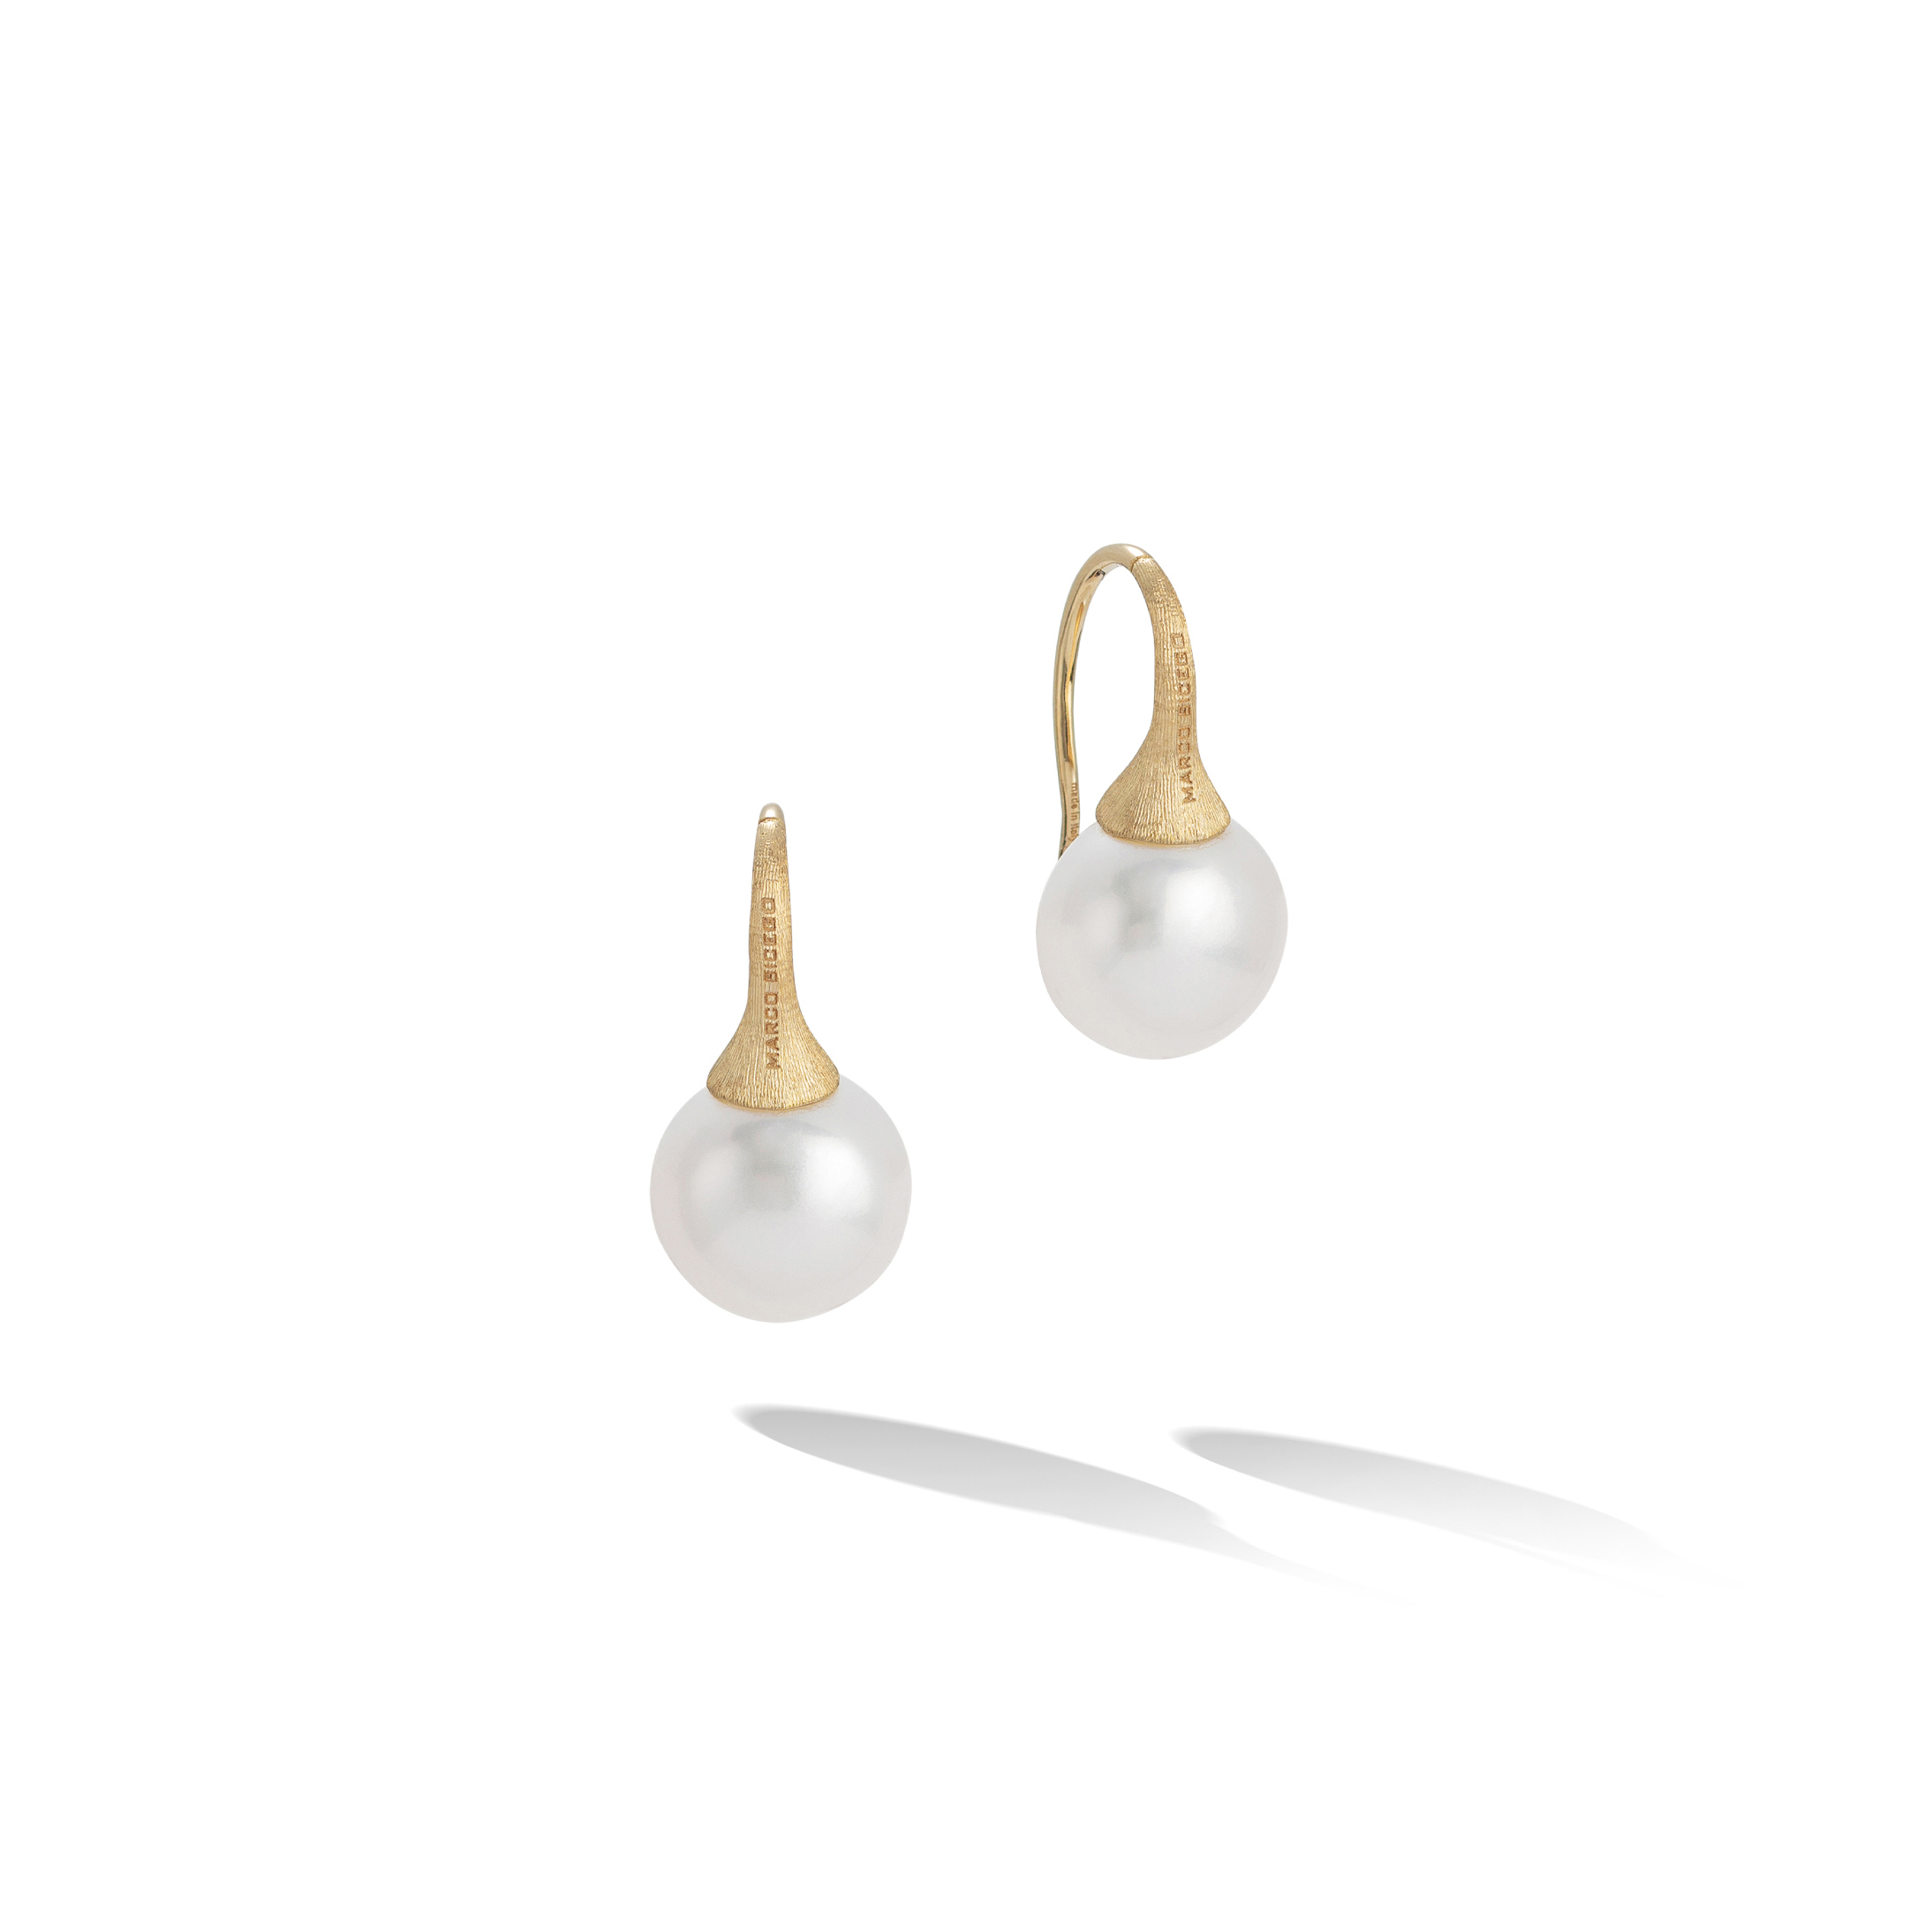 OB1653-A PL01 Y 02Marco Bicego Africa Collection 18k Yellow Gold and Pearl French Wire Earrings